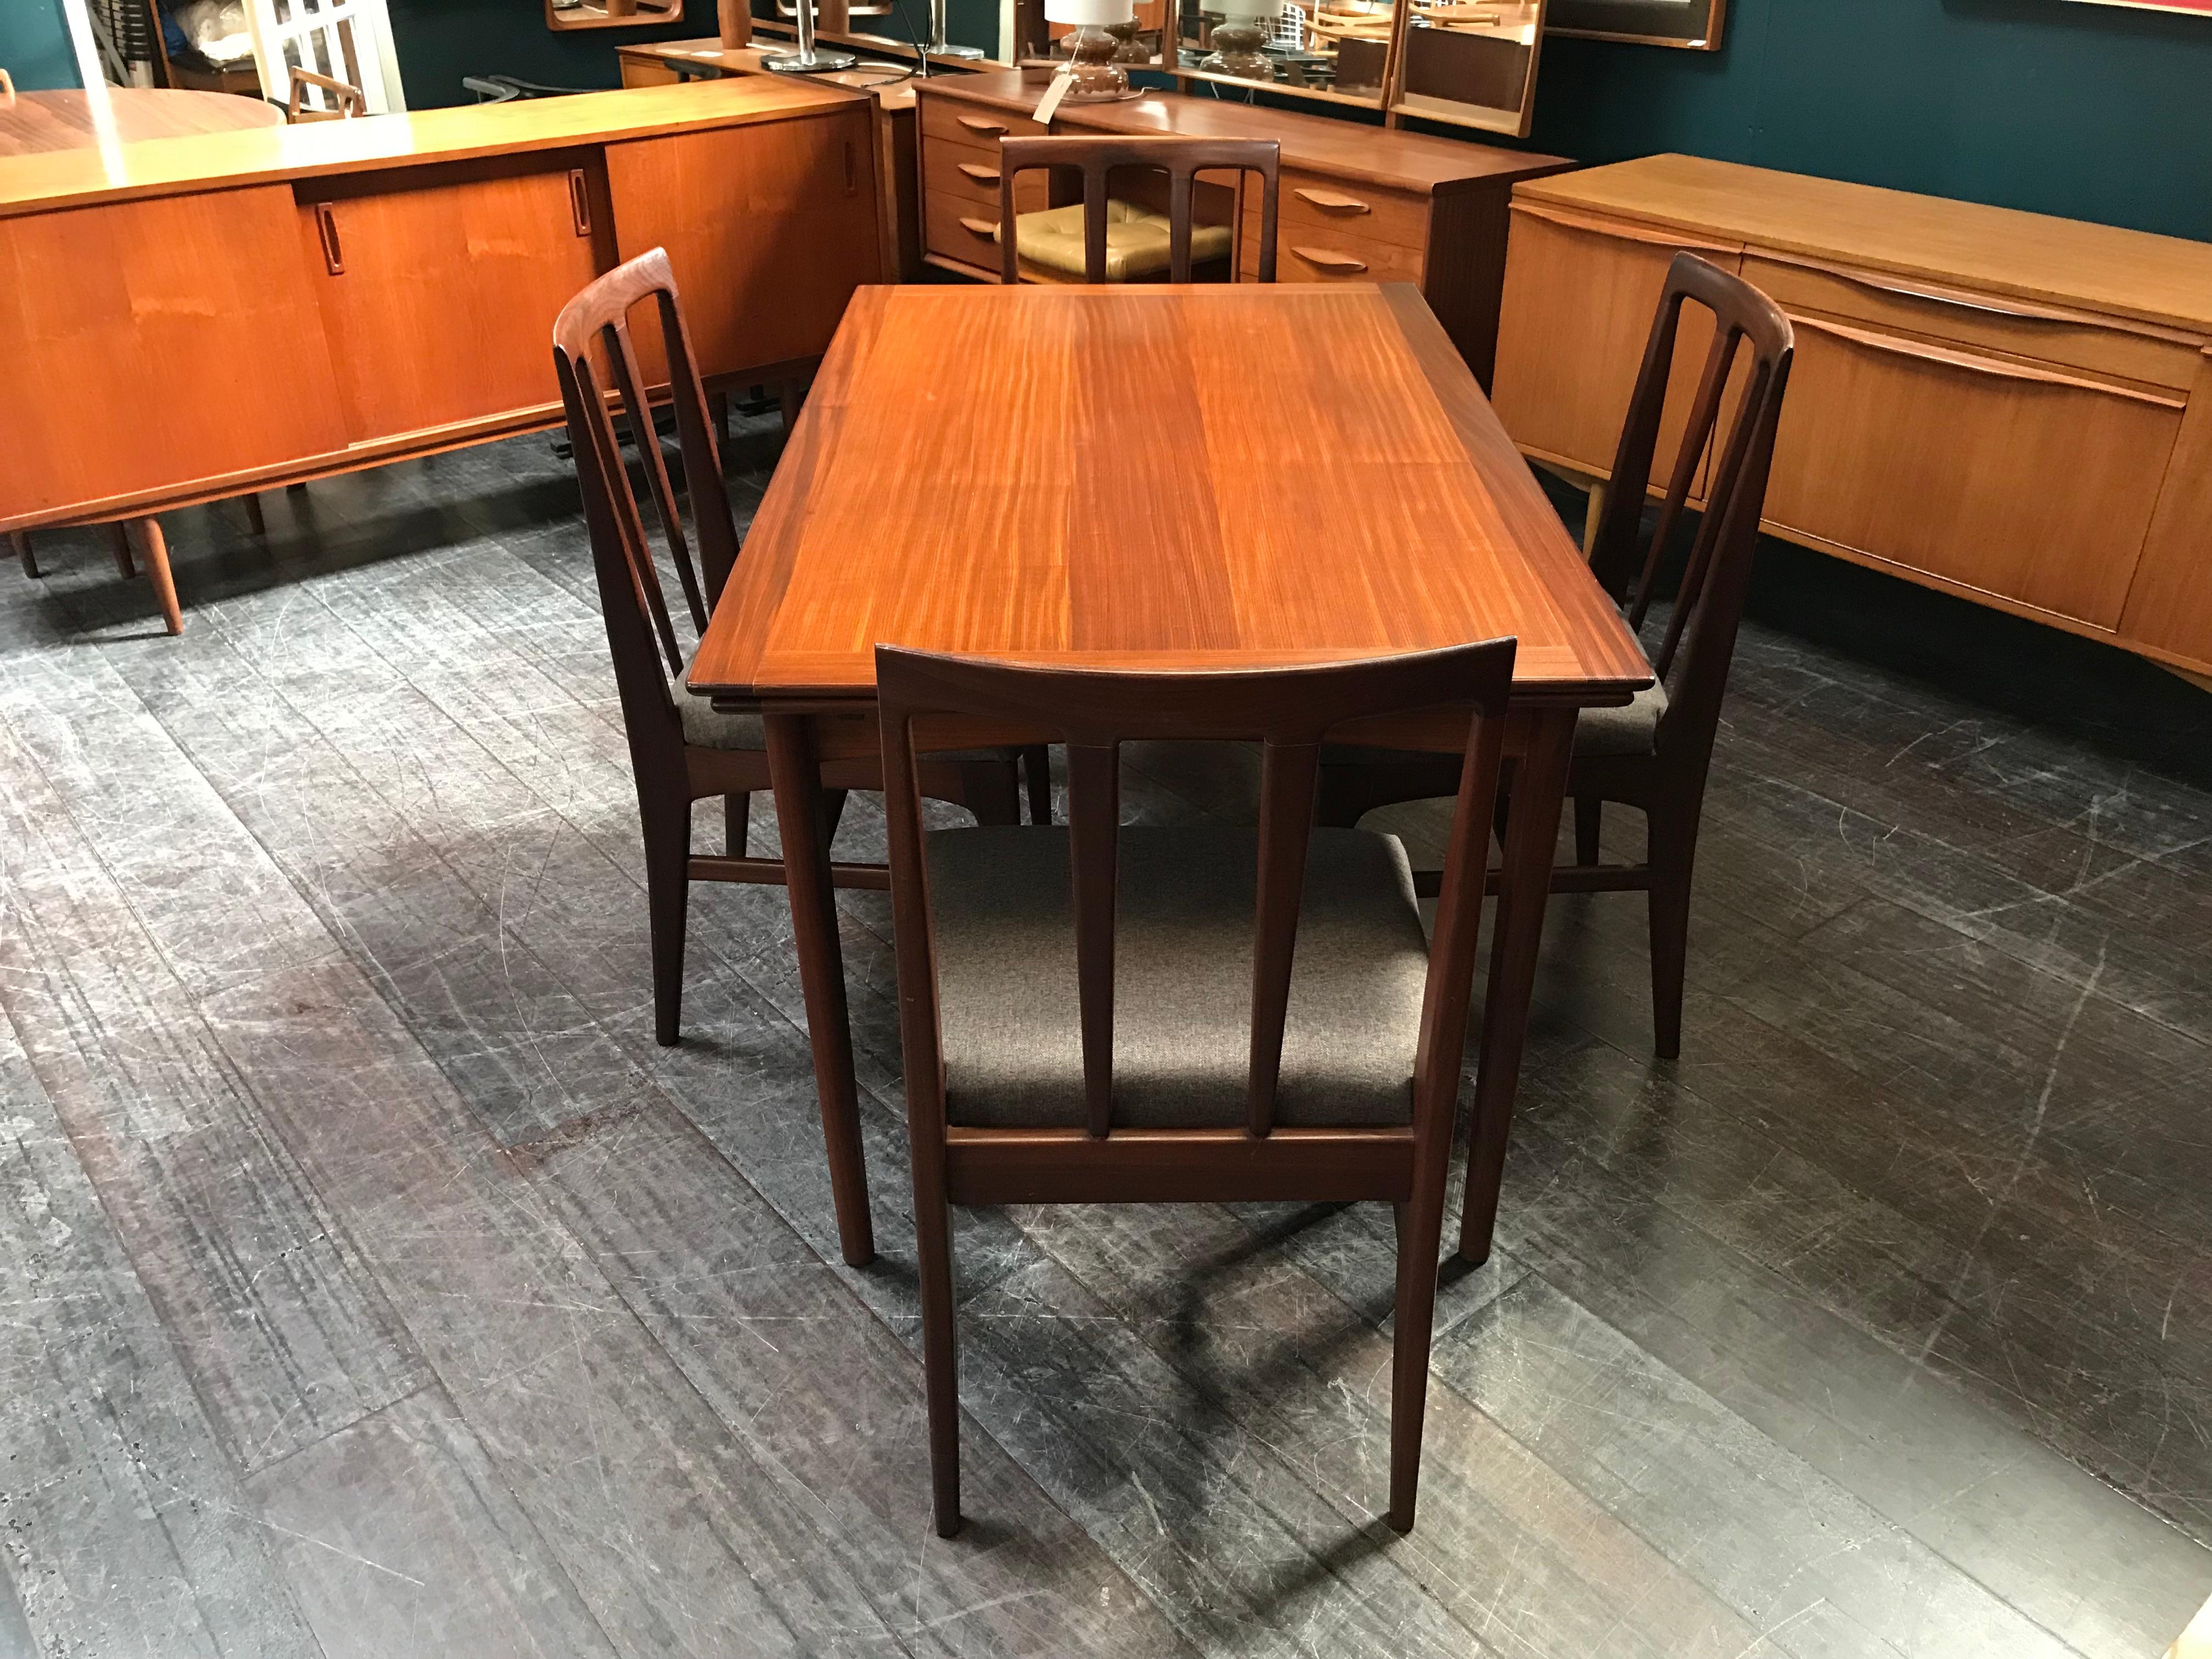 Teak Extending Midcentury Afrormosia Dining Table with 4 Chairs by Younger of Glasgow For Sale